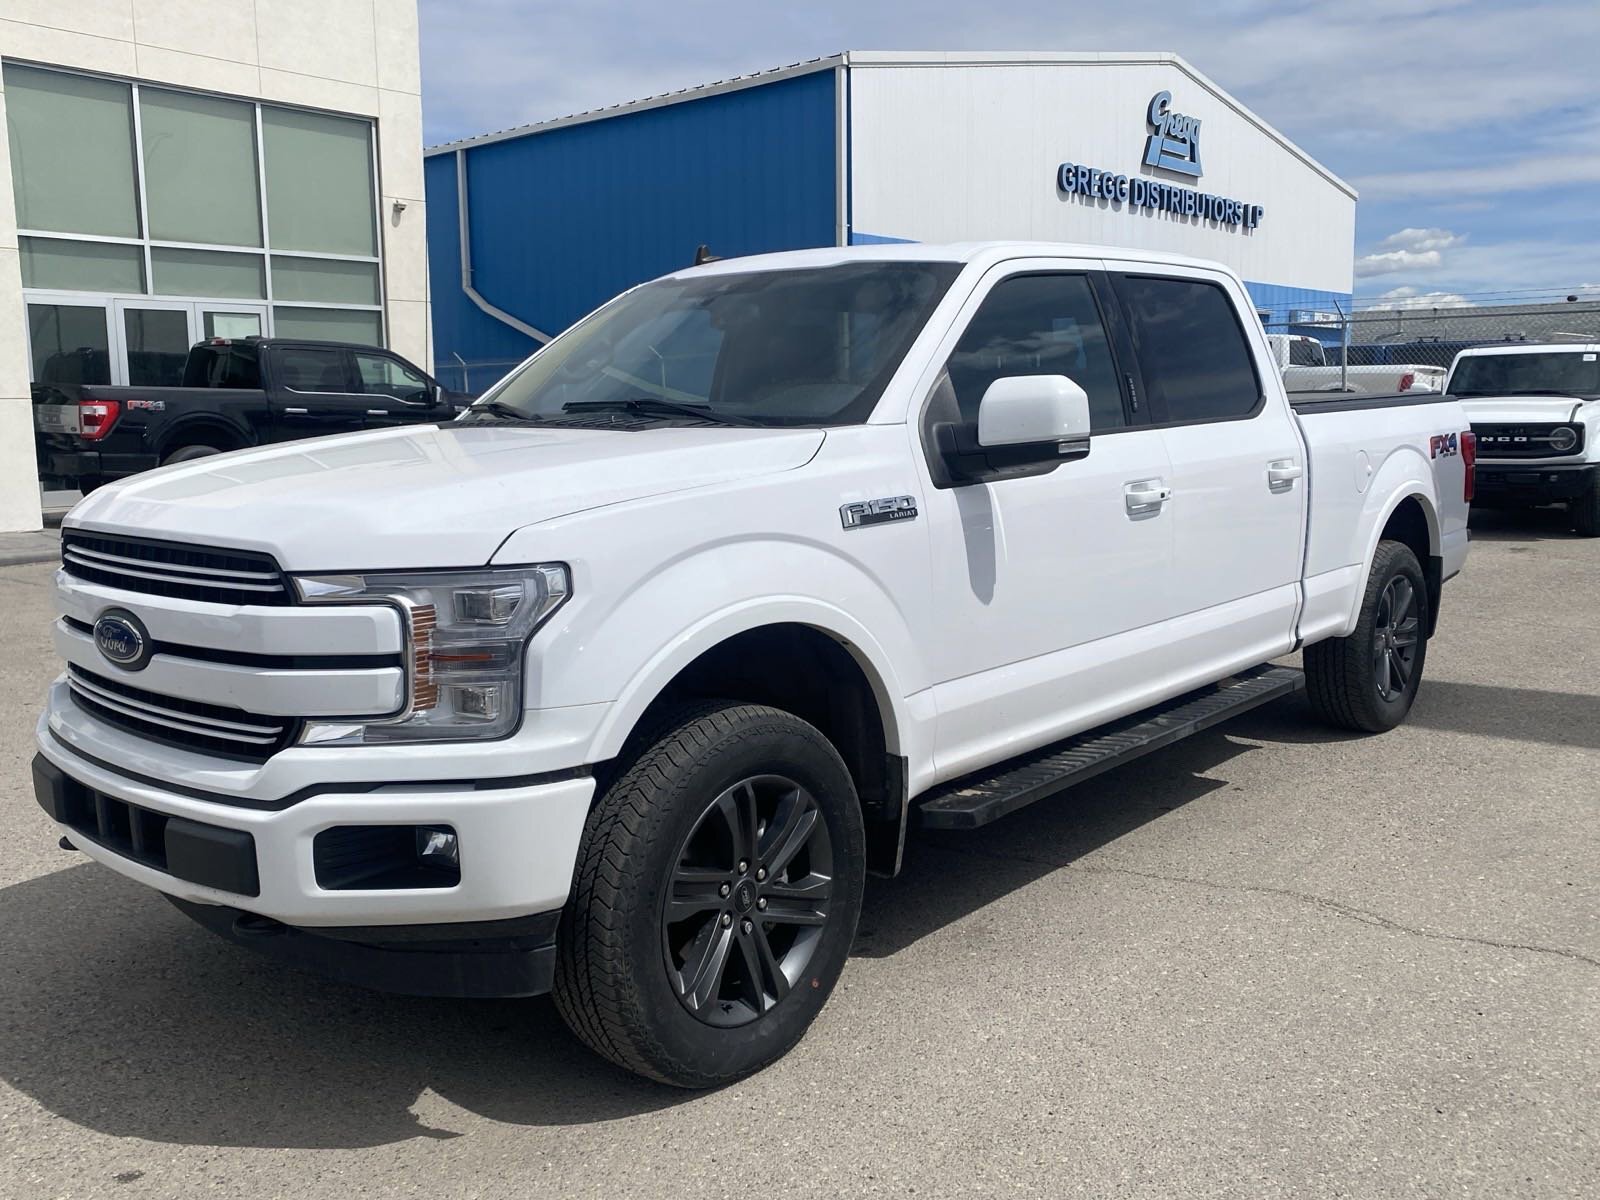 2020 Ford F-150 LARIAT - MOONROOF 3.5 ECOBOOST